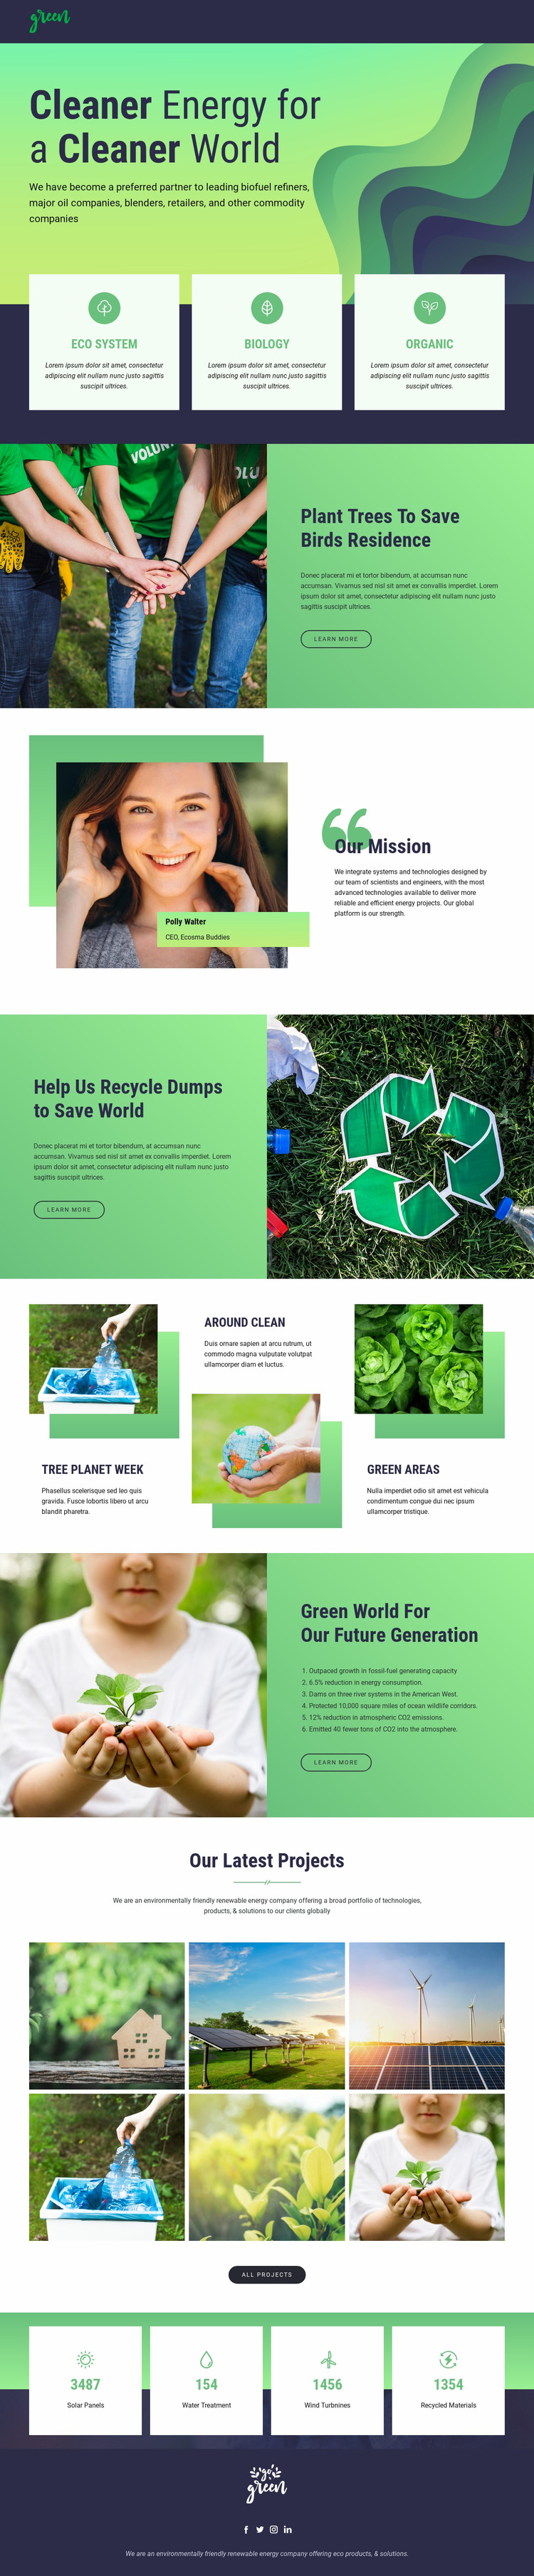 Clean energy to save nature Website Mockup